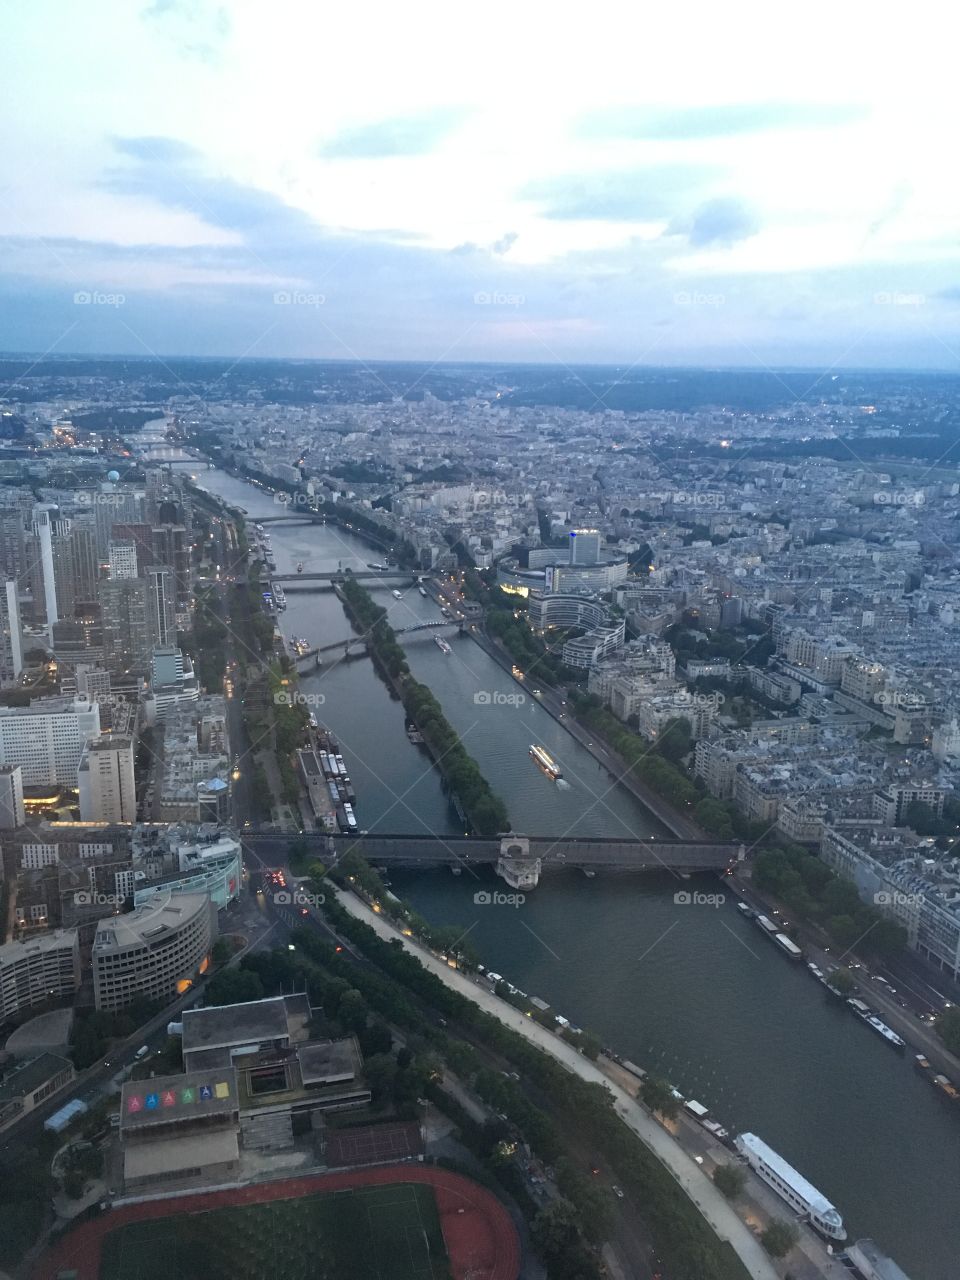 A view of the Seine River atop the Eiffel Tower in Paris, just as the sun begins to go down